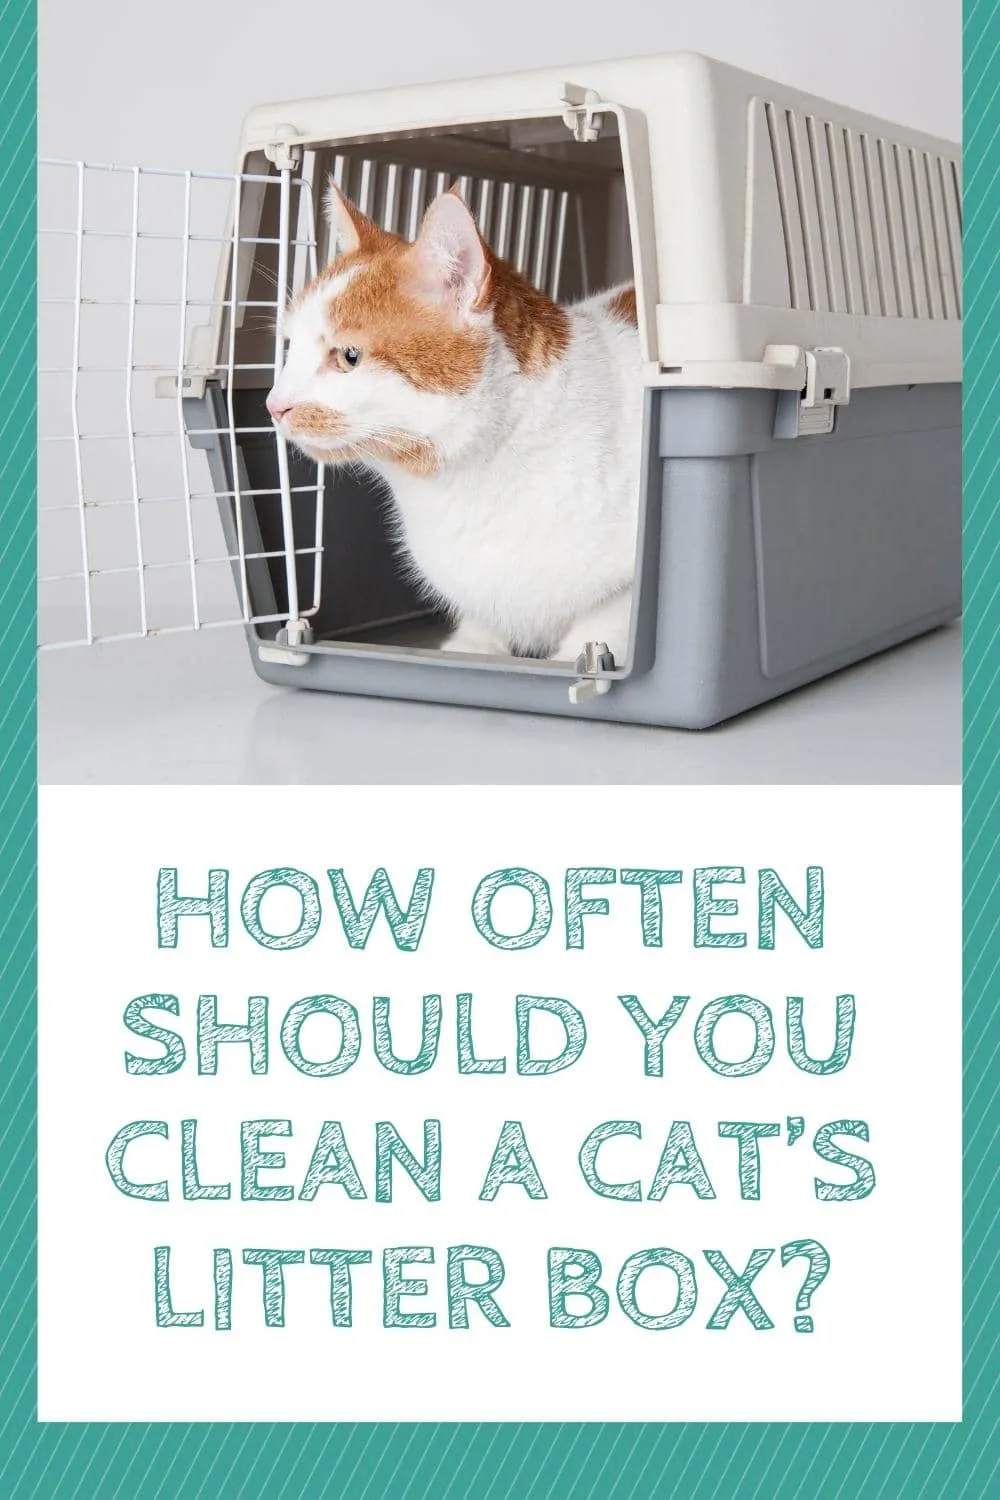 How Often Should You Clean a Cat’s Litter Box